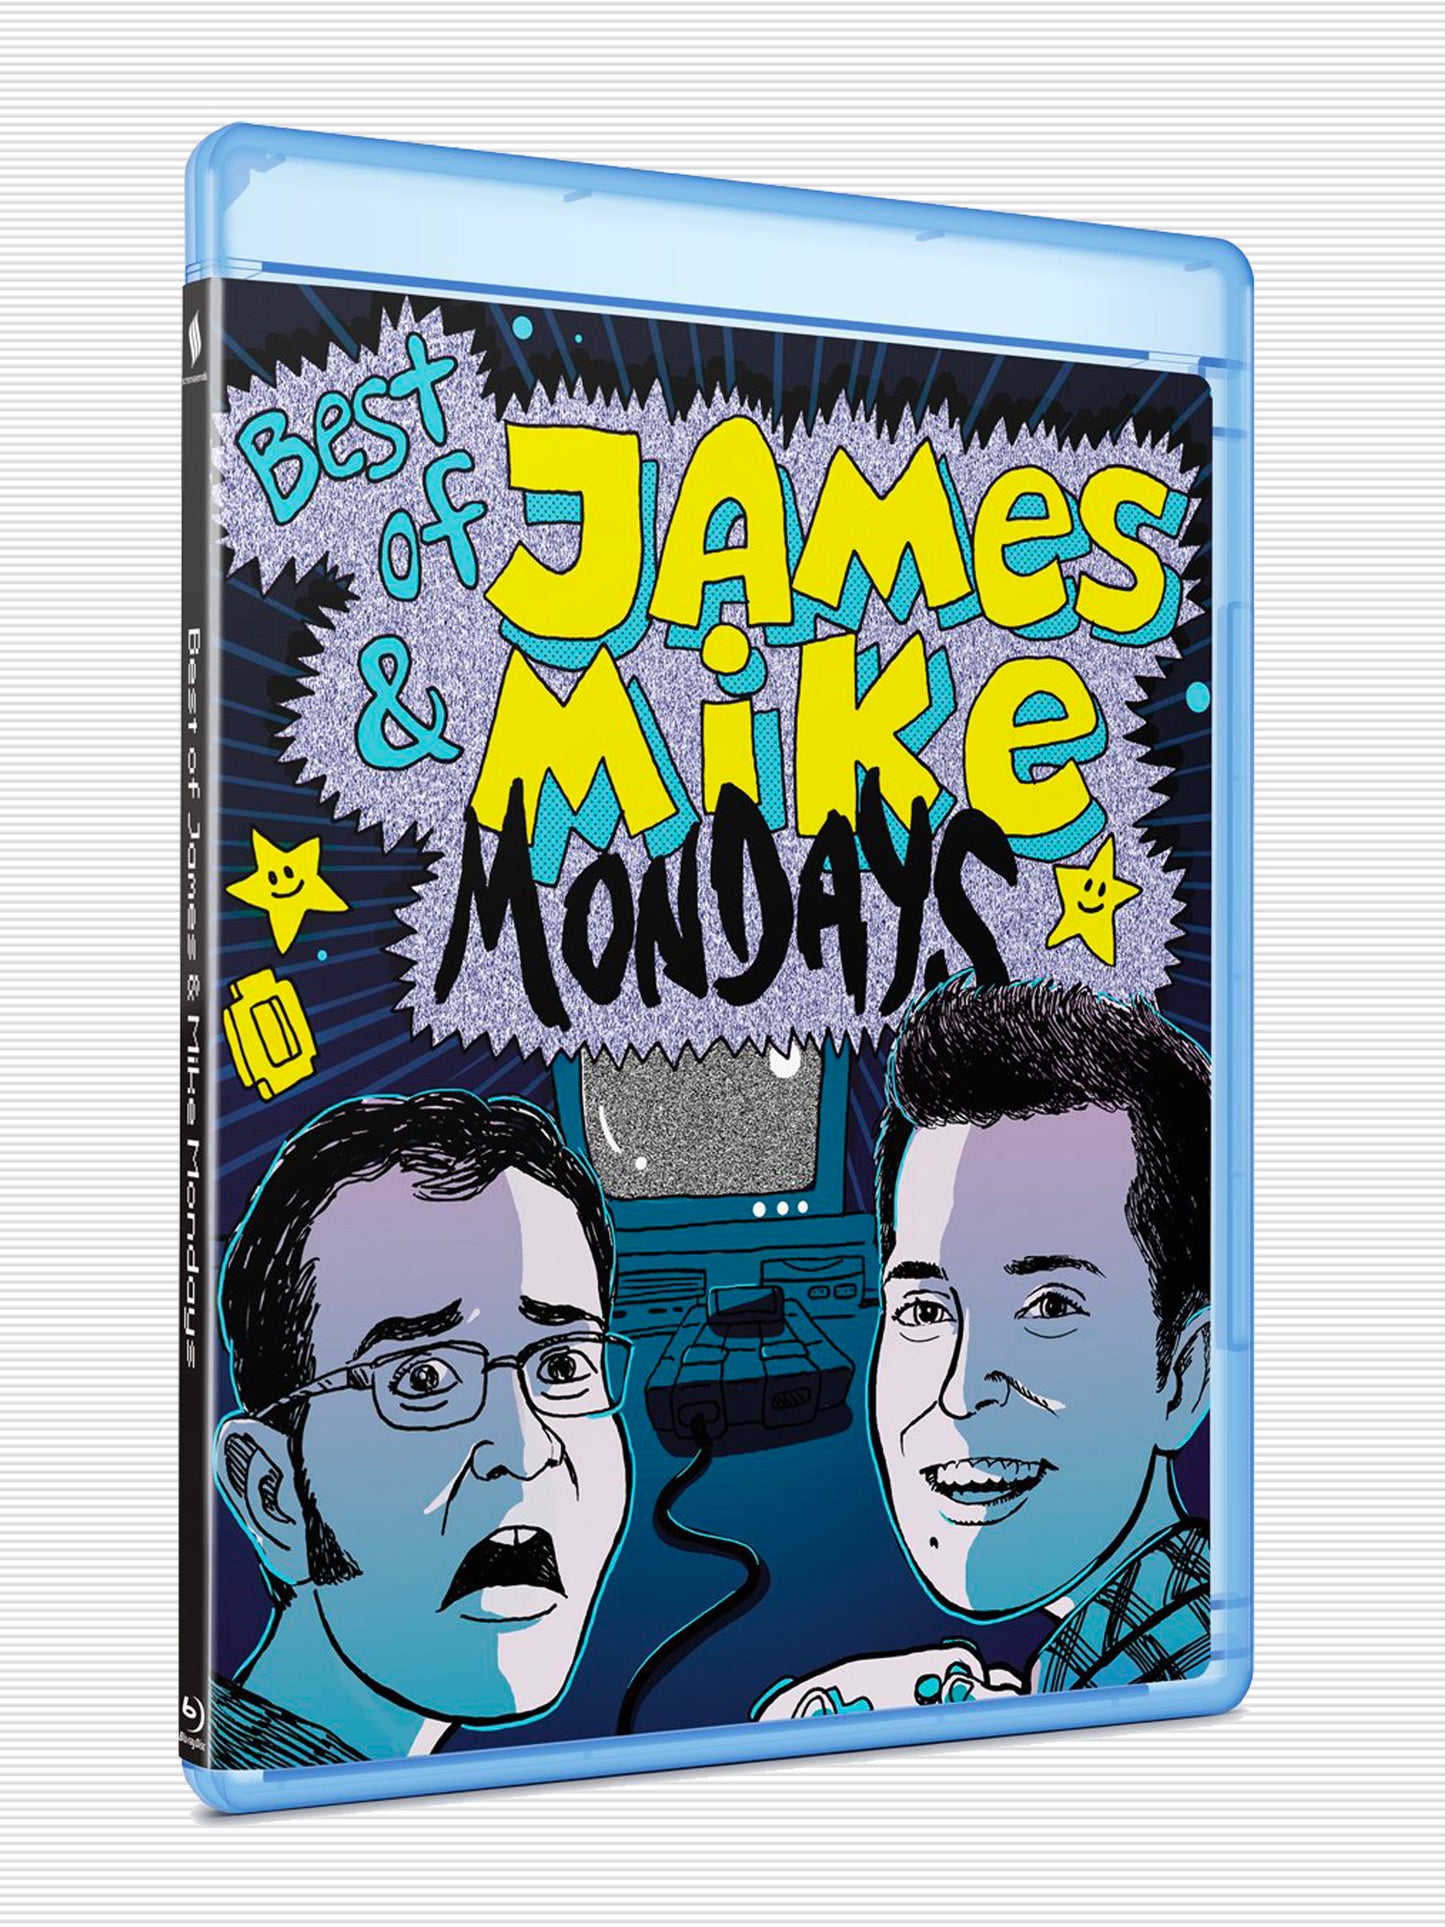 Best of James and Mike Monday Blu-ray